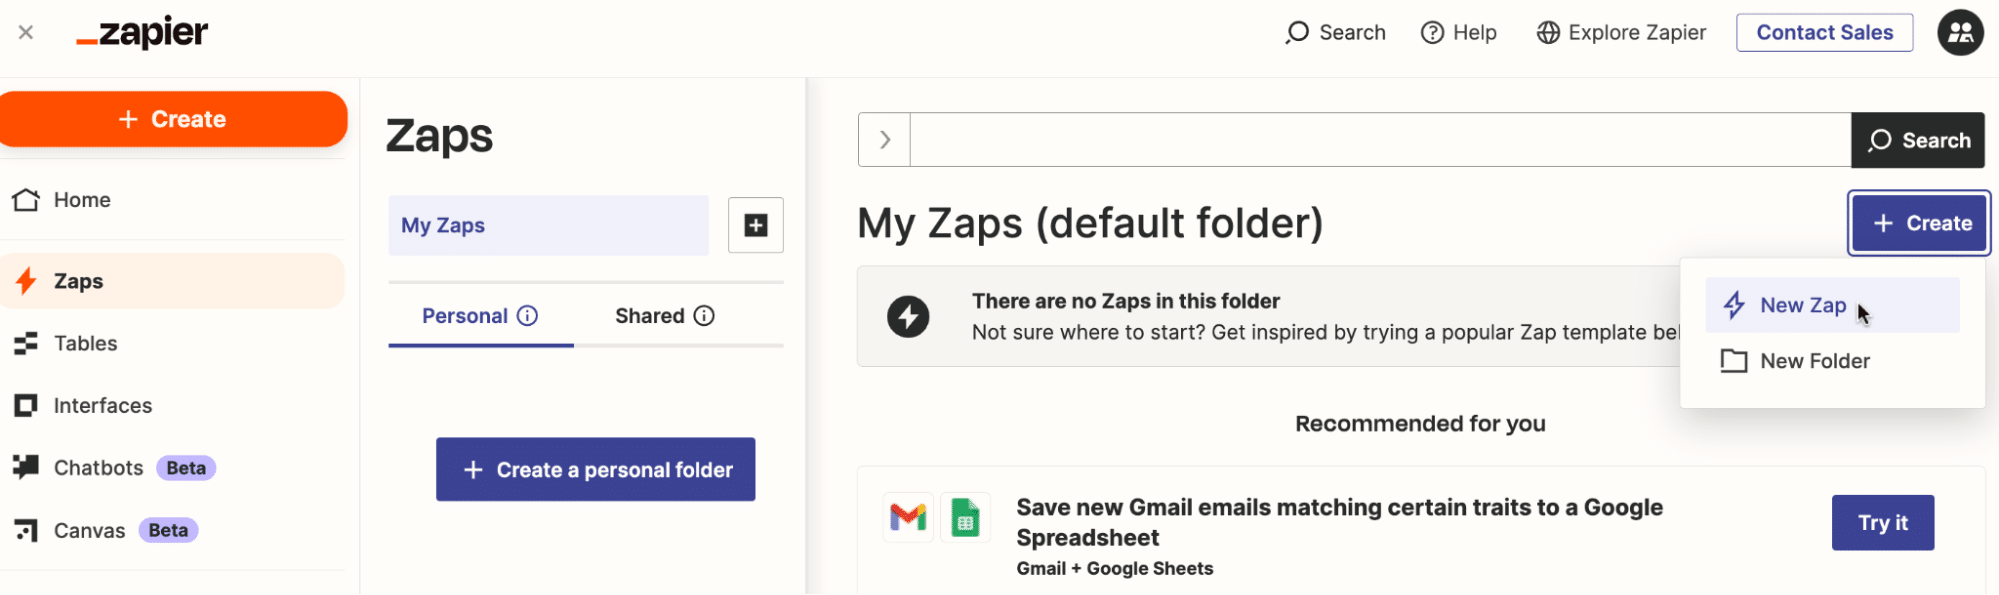 Navigating to '+ Create' to begin the setup of a New Zap in Zapier.